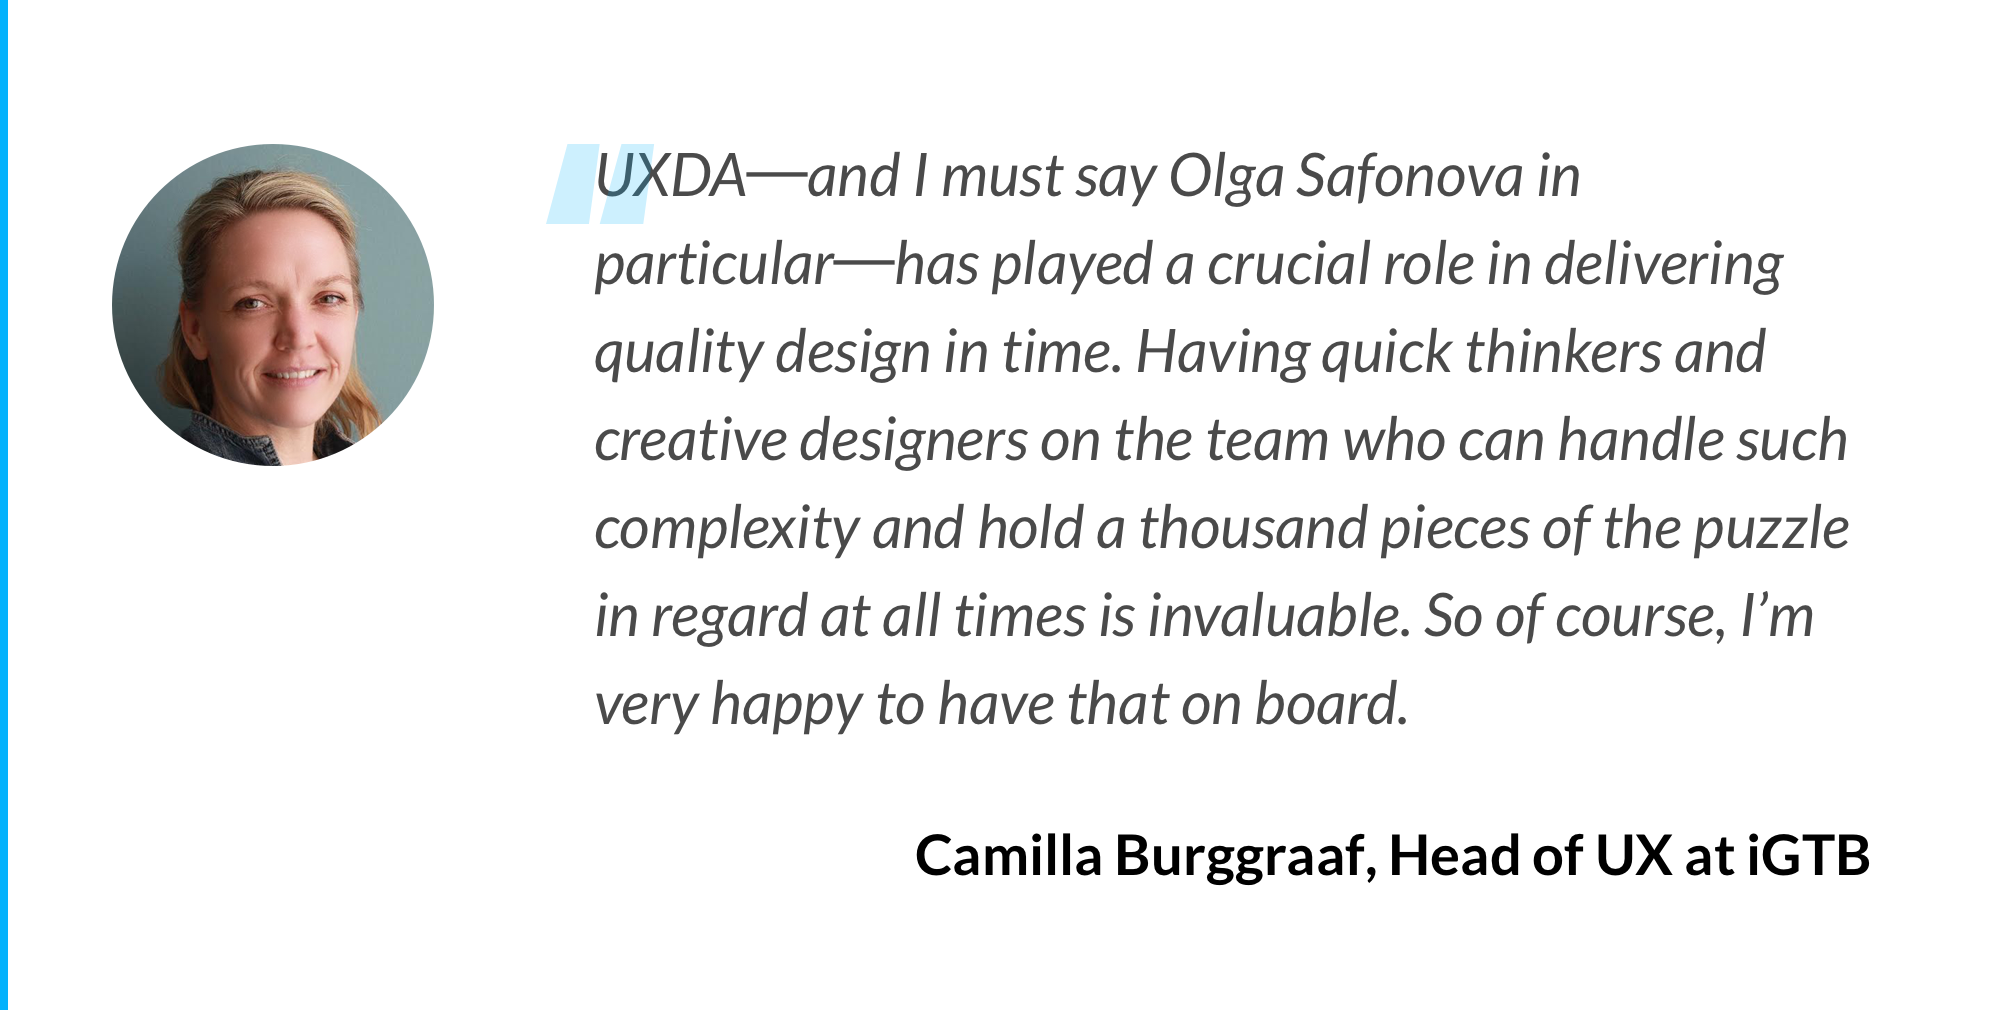 igtb-case-study-quote-camilla-burggraaf-3-at-2x.png